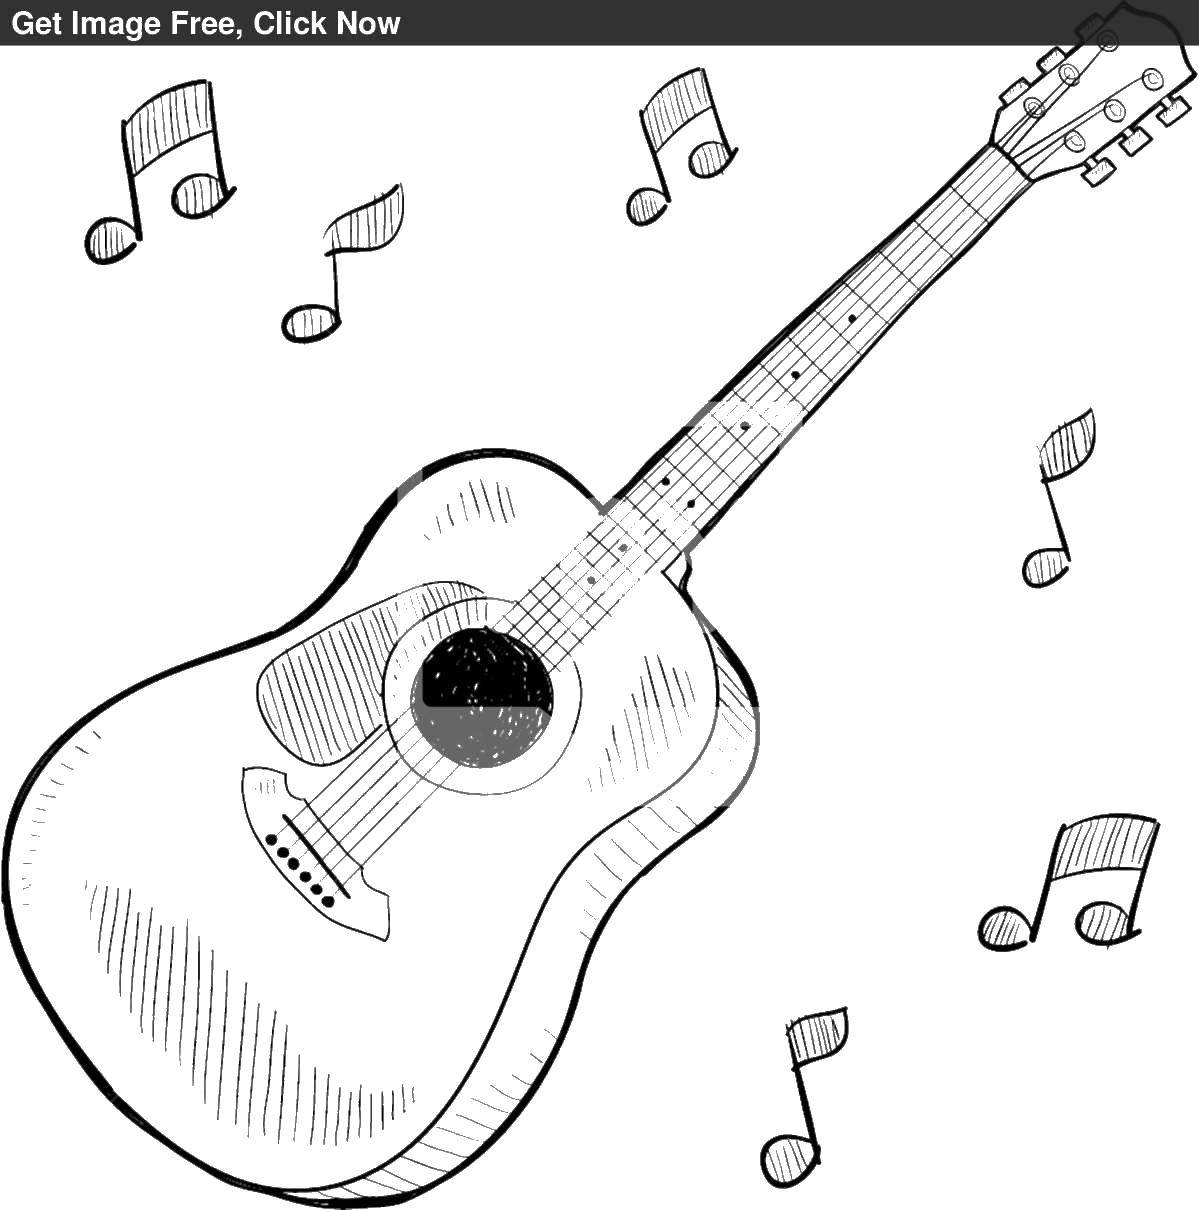 Coloring Guitar and music notes. Category Electric guitar. Tags:  guitar, strings, sheet music.